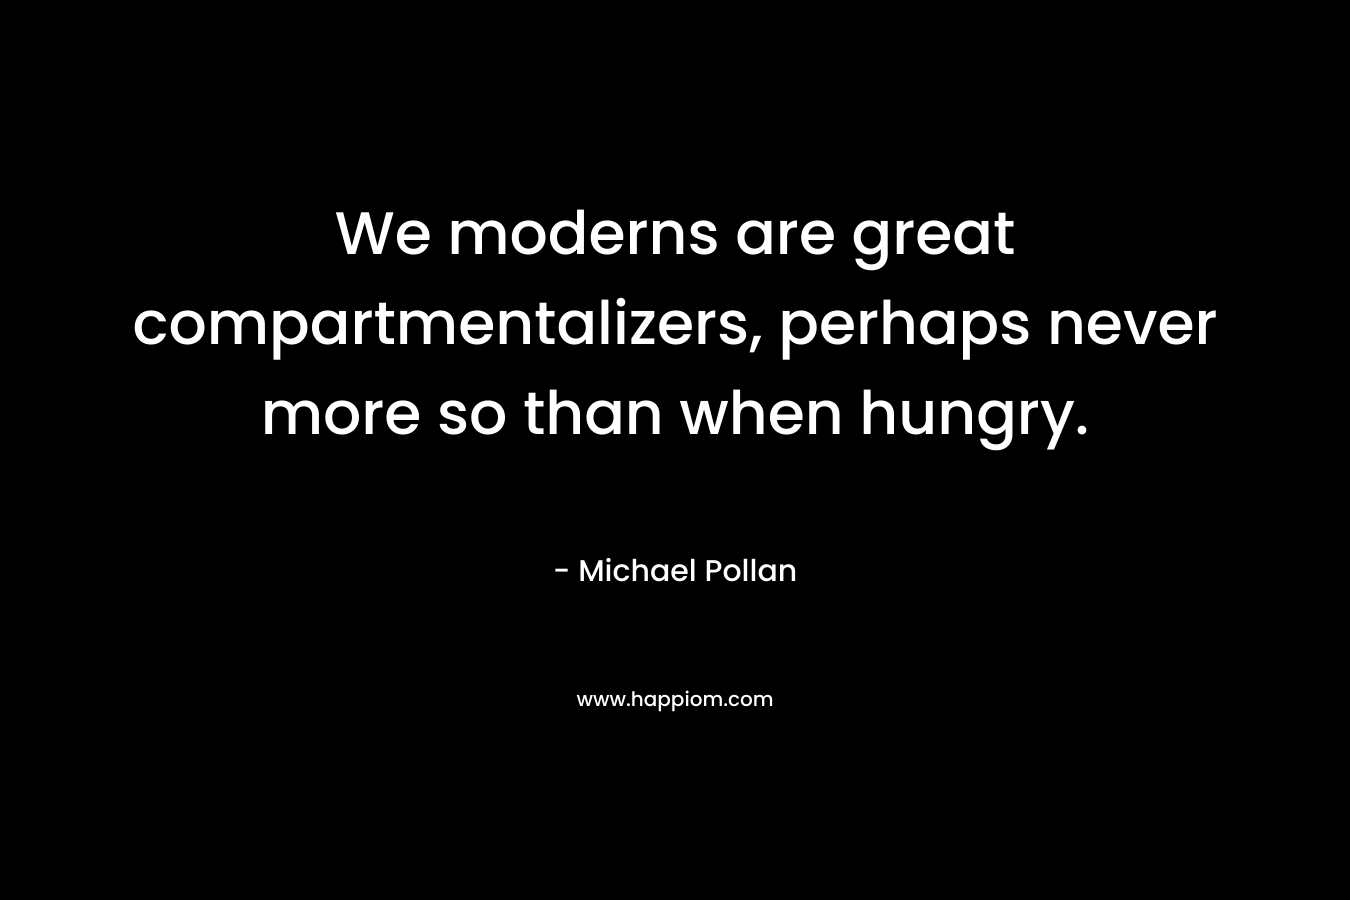 We moderns are great compartmentalizers, perhaps never more so than when hungry.